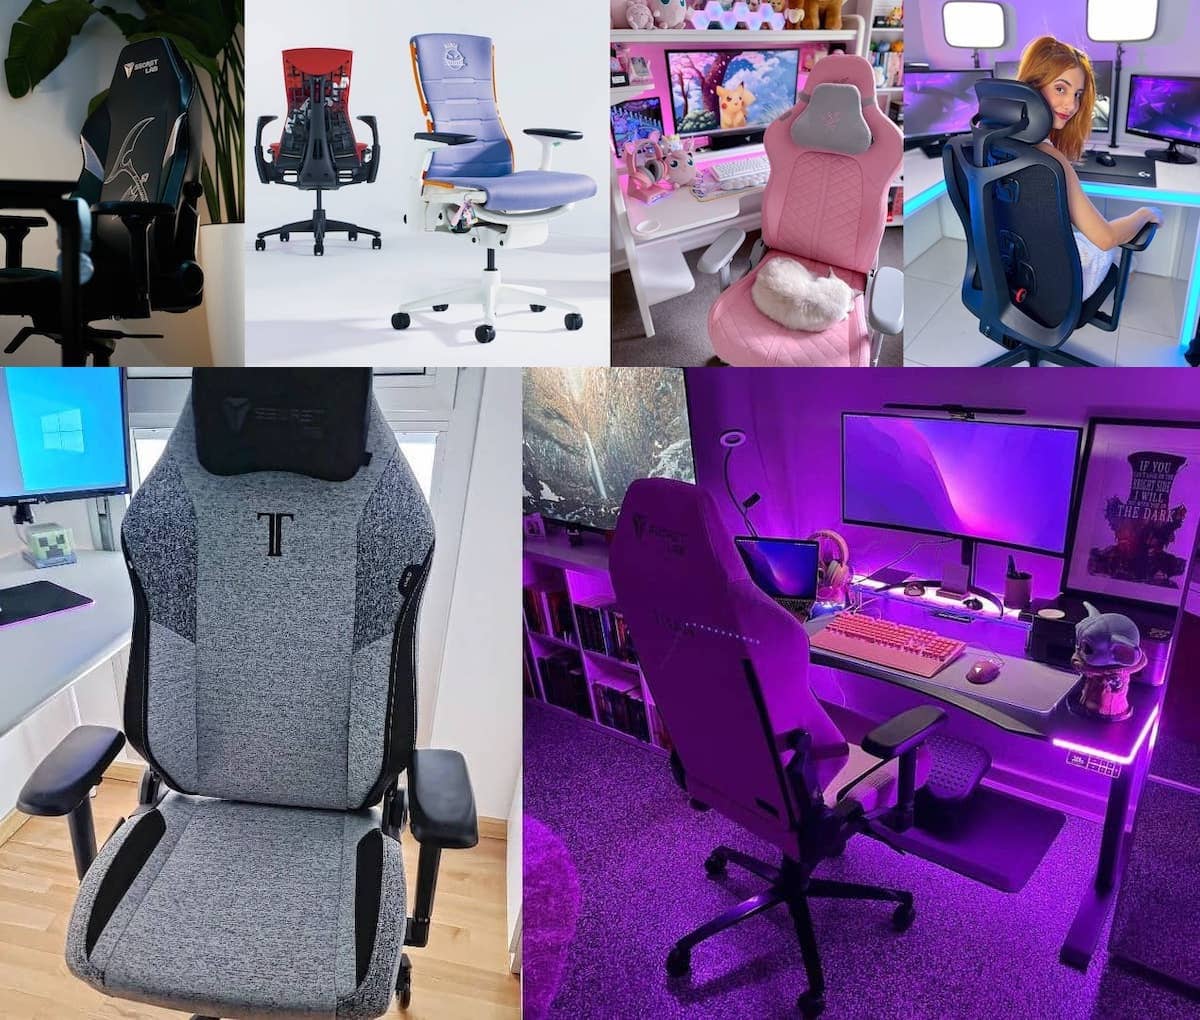 best gaming chair recommendations for gamers from Reddit